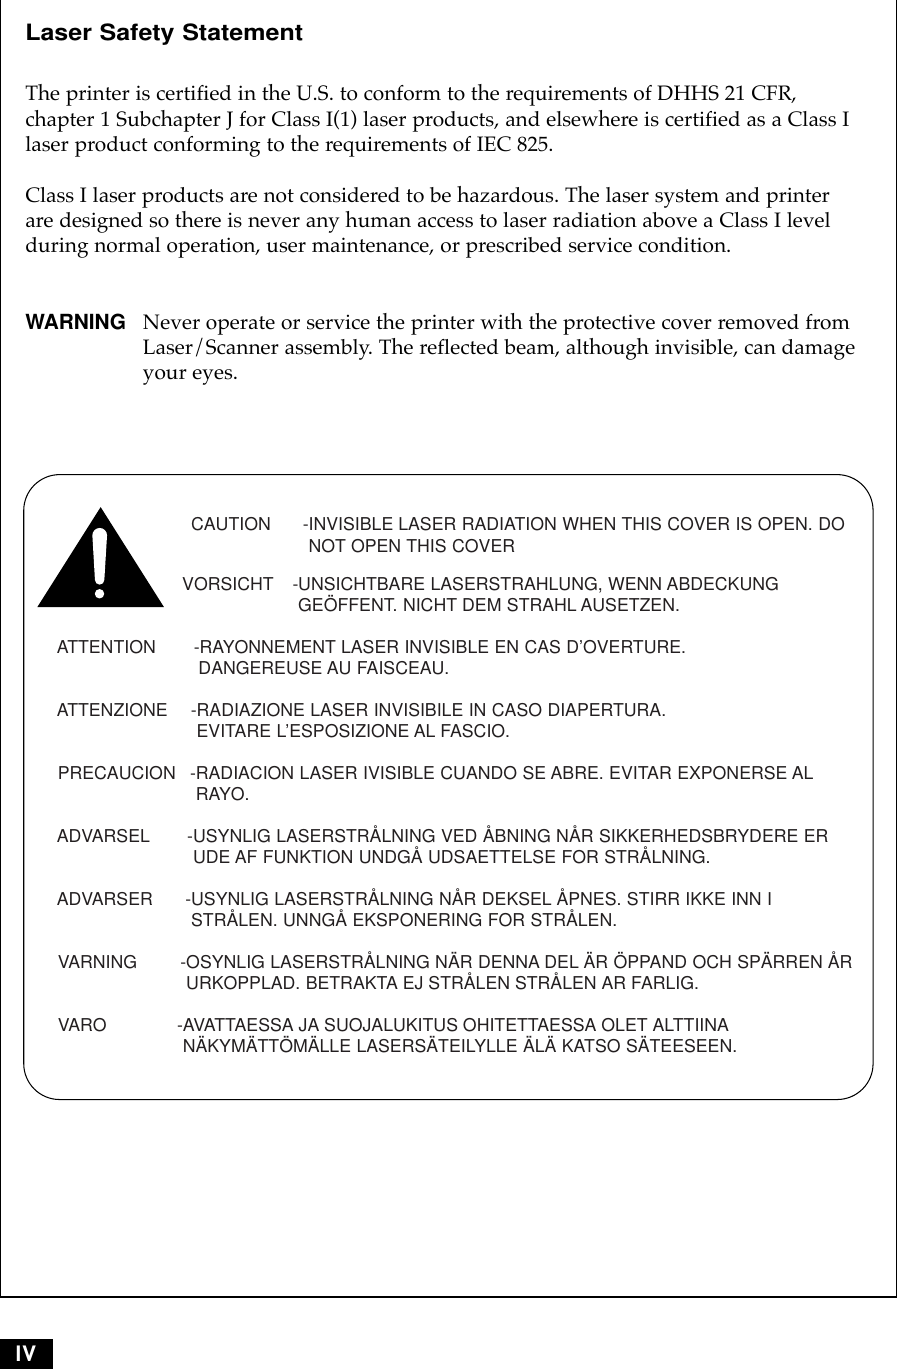 IVLaser Safety Statement The printer is certified in the U.S. to conform to the requirements of DHHS 21 CFR, chapter 1 Subchapter J for Class I(1) laser products, and elsewhere is certified as a Class Ilaser product conforming to the requirements of IEC 825.Class I laser products are not considered to be hazardous. The laser system and printerare designed so there is never any human access to laser radiation above a Class I levelduring normal operation, user maintenance, or prescribed service condition.WARNING Never operate or service the printer with the protective cover removed fromLaser/Scanner assembly. The reflected beam, although invisible, can damageyour eyes.CAUTION -INVISIBLE LASER RADIATION WHEN THIS COVER IS OPEN. DONOT OPEN THIS COVERVORSICHT -UNSICHTBARE LASERSTRAHLUNG, WENN ABDECKUNGGEÖFFENT. NICHT DEM STRAHL AUSETZEN.ATTENTION       -RAYONNEMENT LASER INVISIBLE EN CAS D’OVERTURE. DANGEREUSE AU FAISCEAU.ATTENZIONE  -RADIAZIONE LASER INVISIBILE IN CASO DIAPERTURA.EVITARE L’ESPOSIZIONE AL FASCIO.PRECAUCION  -RADIACION LASER IVISIBLE CUANDO SE ABRE. EVITAR EXPONERSE ALRAYO.ADVARSEL -USYNLIG LASERSTRÅLNING VED ÅBNING NÅR SIKKERHEDSBRYDERE ERUDE AF FUNKTION UNDGÅ UDSAETTELSE FOR STRÅLNING.ADVARSER      -USYNLIG LASERSTRÅLNING NÅR DEKSEL ÅPNES. STIRR IKKE INN ISTRÅLEN. UNNGÅ EKSPONERING FOR STRÅLEN.VARNING        -OSYNLIG LASERSTRÅLNING NÄR DENNA DEL ÄR ÖPPAND OCH SPÄRREN ÅRURKOPPLAD. BETRAKTA EJ STRÅLEN STRÅLEN AR FARLIG.VARO             -AVATTAESSA JA SUOJALUKITUS OHITETTAESSA OLET ALTTIINANÄKYMÄTTÖMÄLLE LASERSÄTEILYLLE ÄLÄ KATSO SÄTEESEEN.